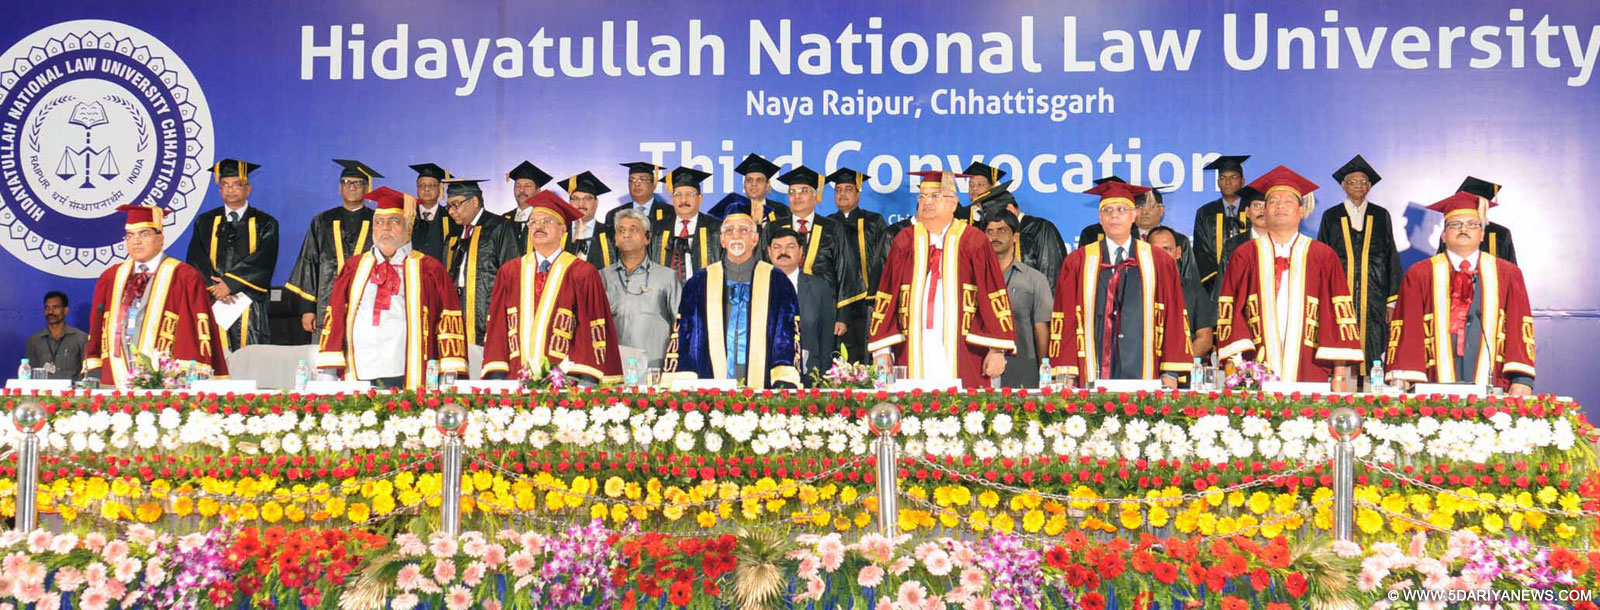 The Vice President, Shri Mohd. Hamid Ansari at the 3rd convocation of the Hidayatullah National Law University, at Raipur, Chhattisgarh on October 17, 2015. The Chief Minister of Chhattisgarh, Dr. Raman Singh and other dignitaries are also seen.